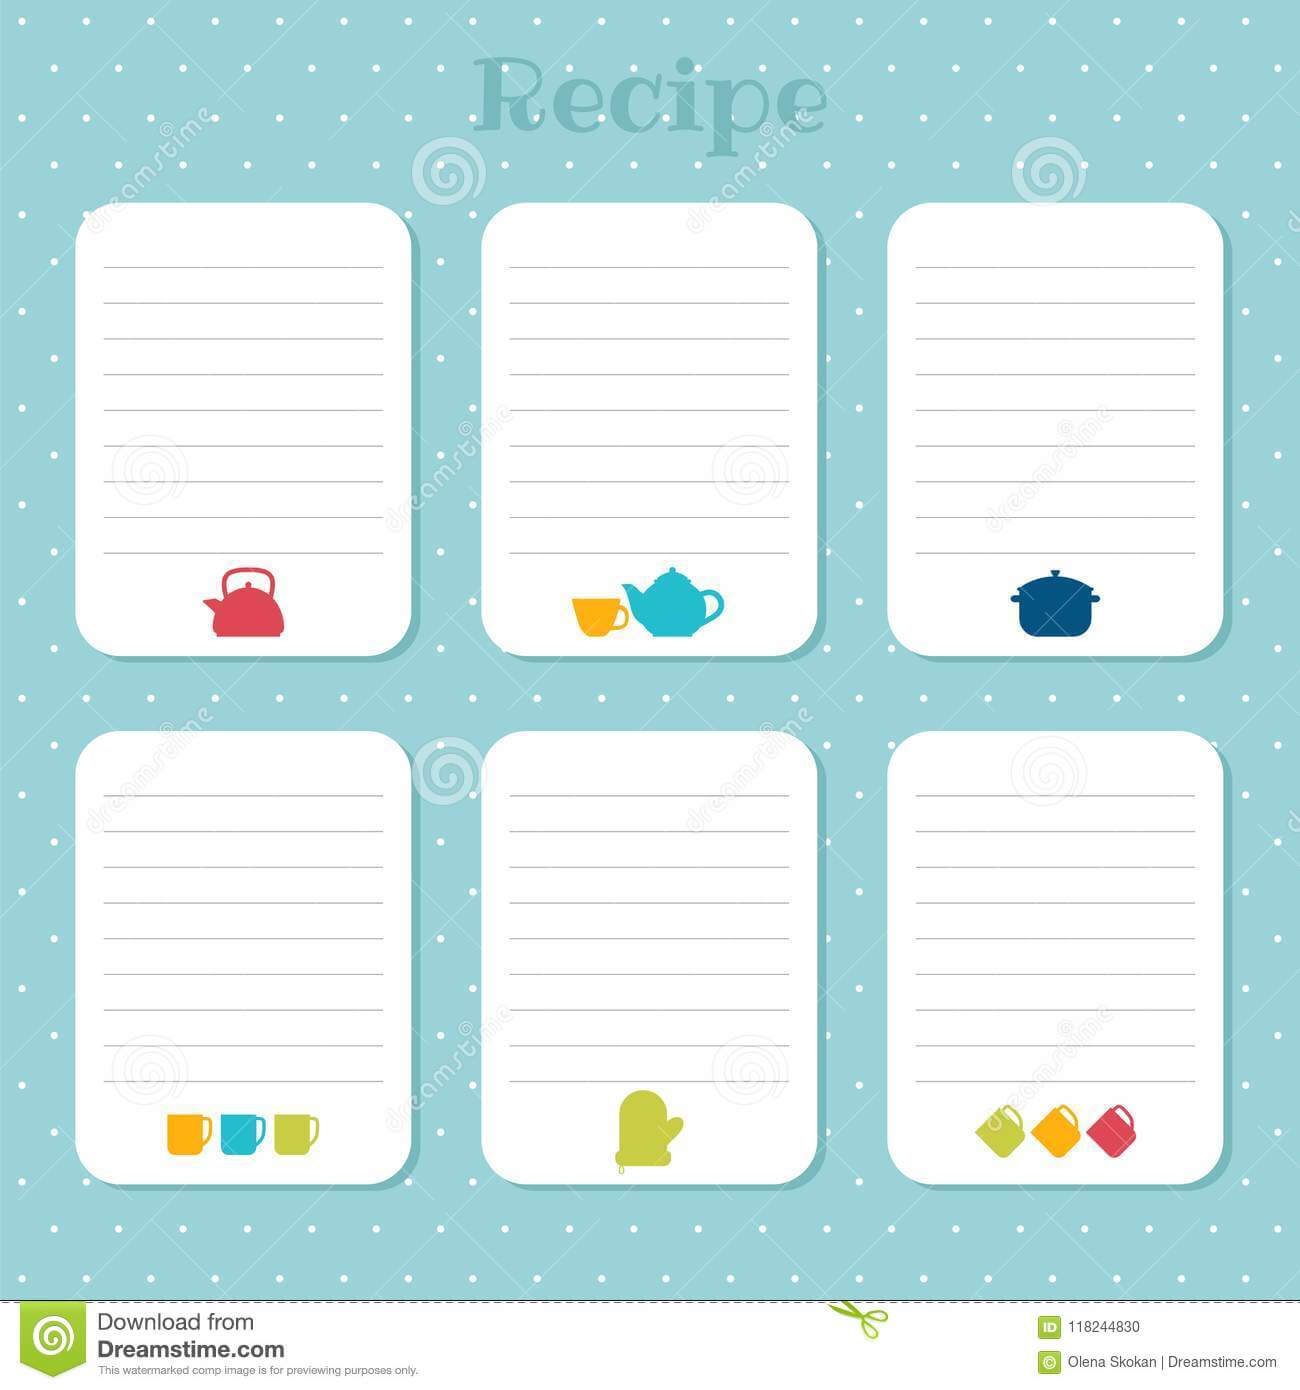 Recipe Cards Set. Cooking Card Templates. For Restaurant Pertaining To Restaurant Recipe Card Template